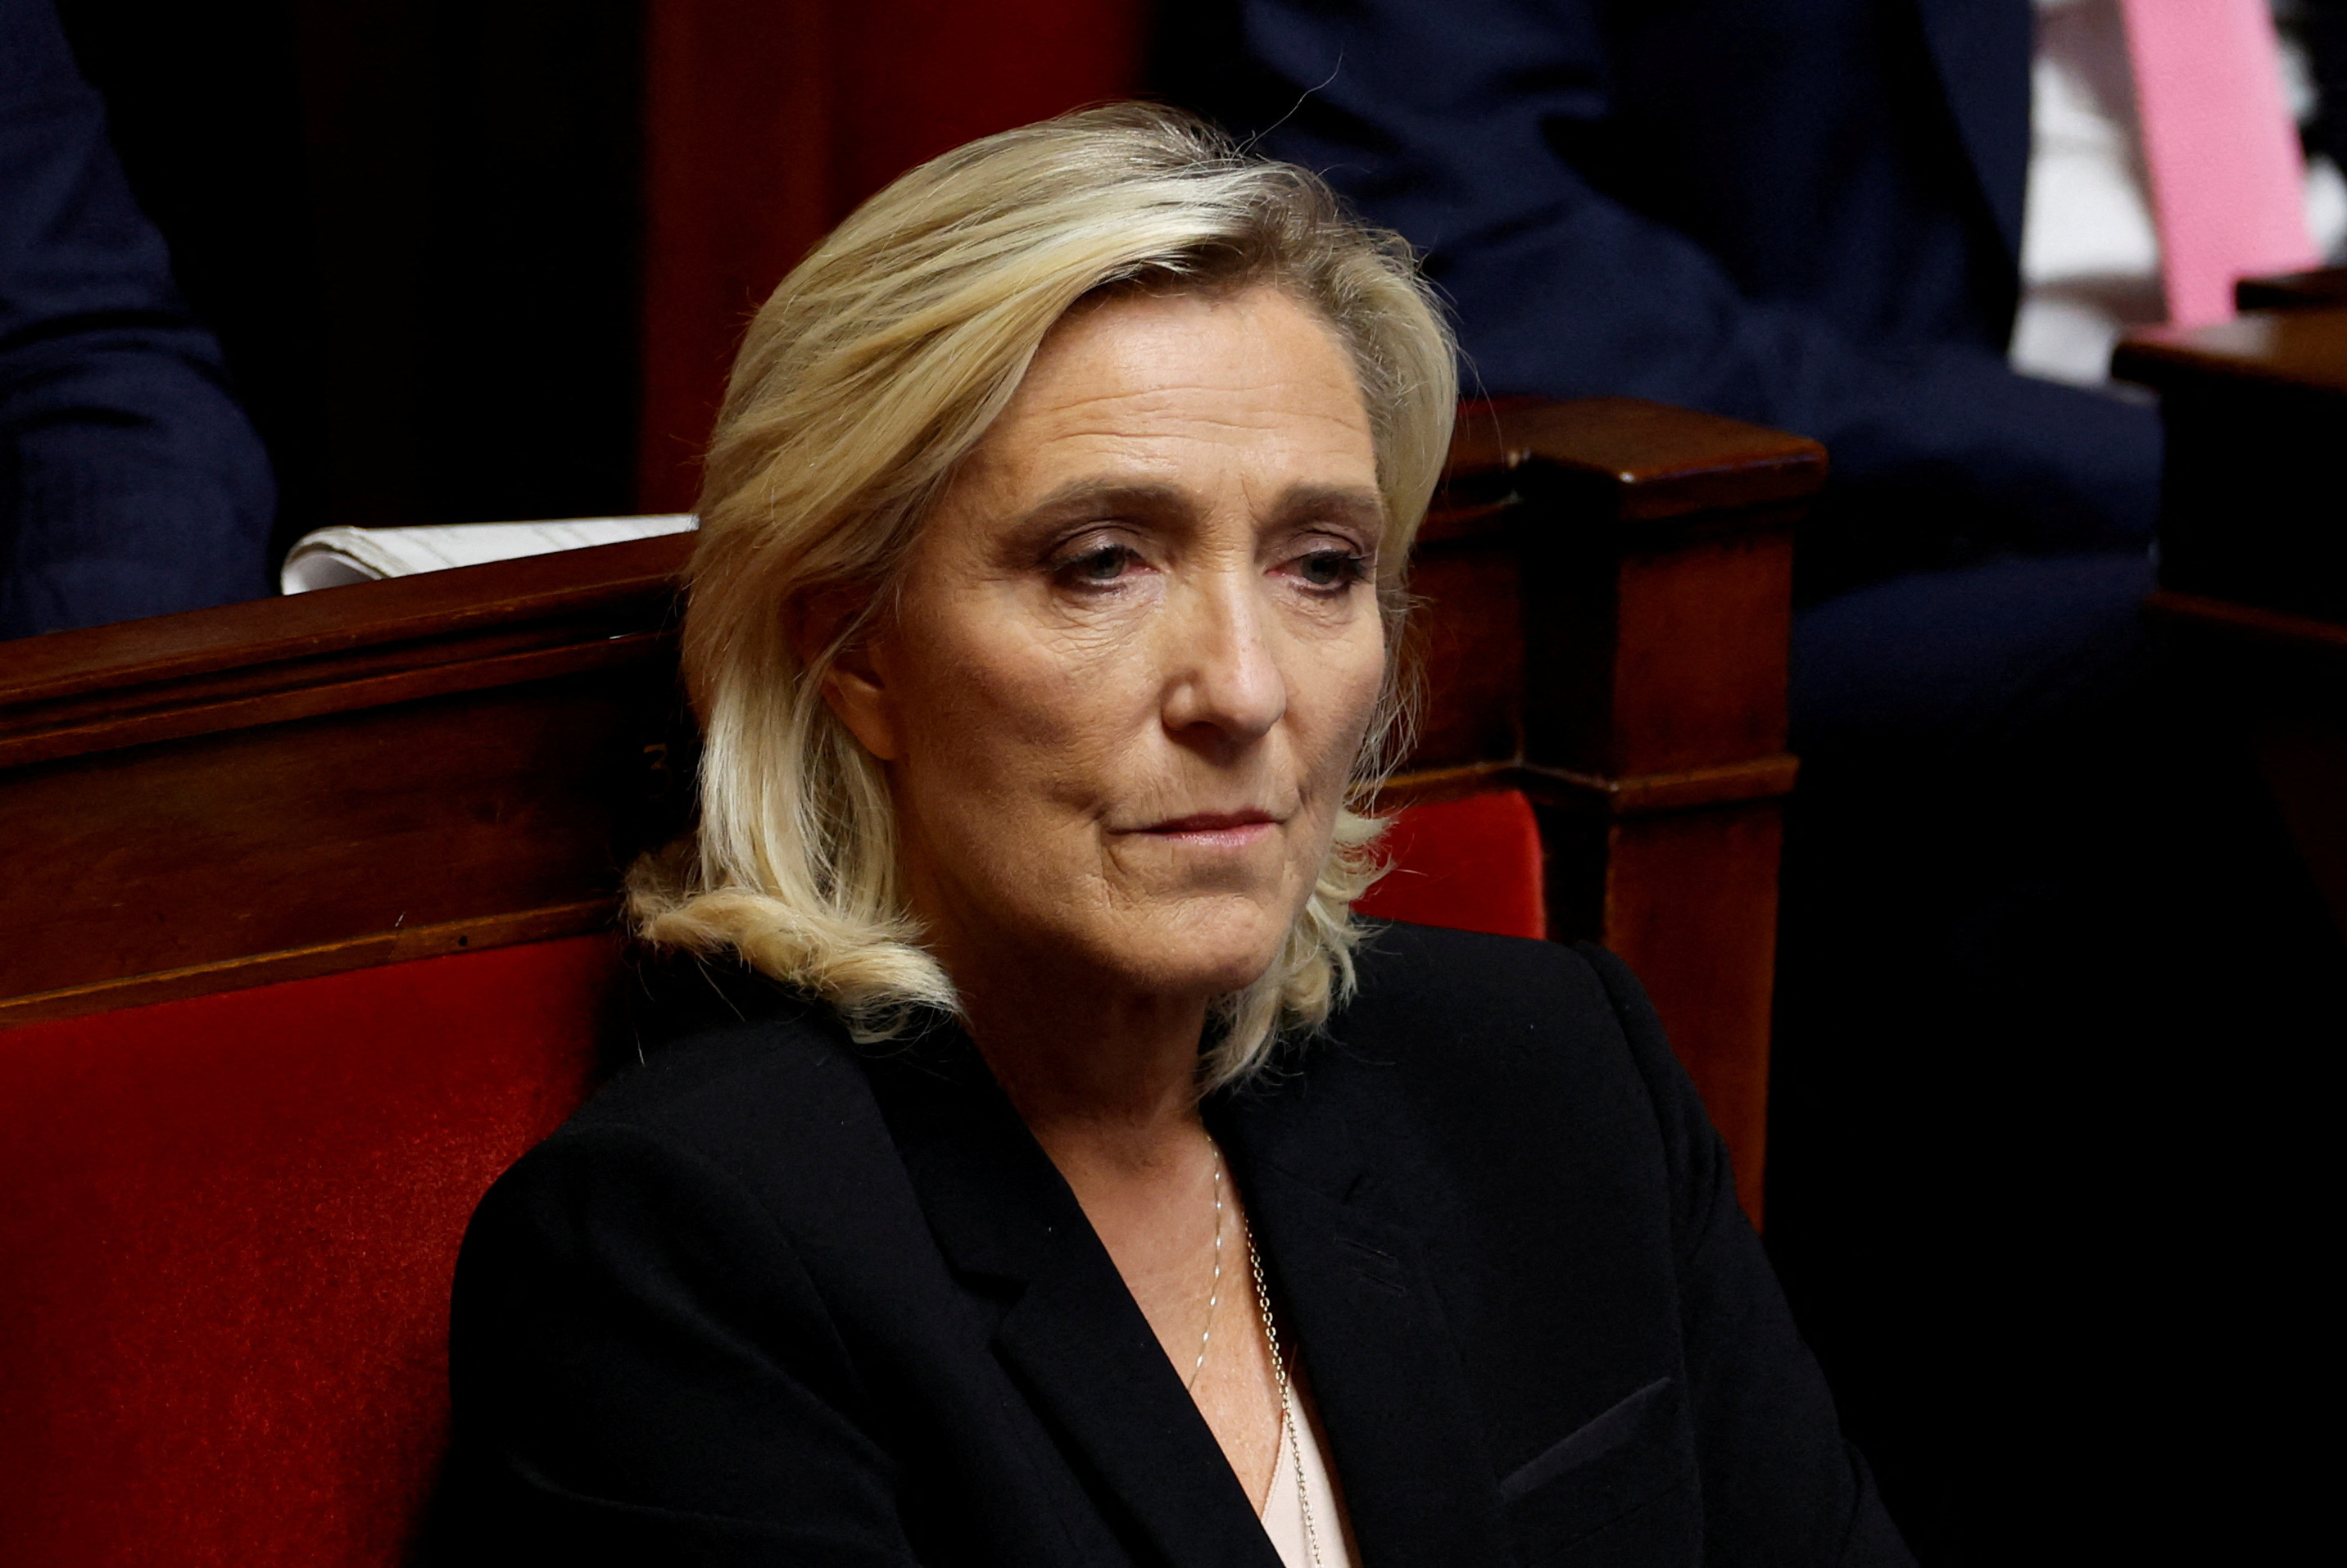 France: Ifop poll, Le Pen is in the lead in the first round of the